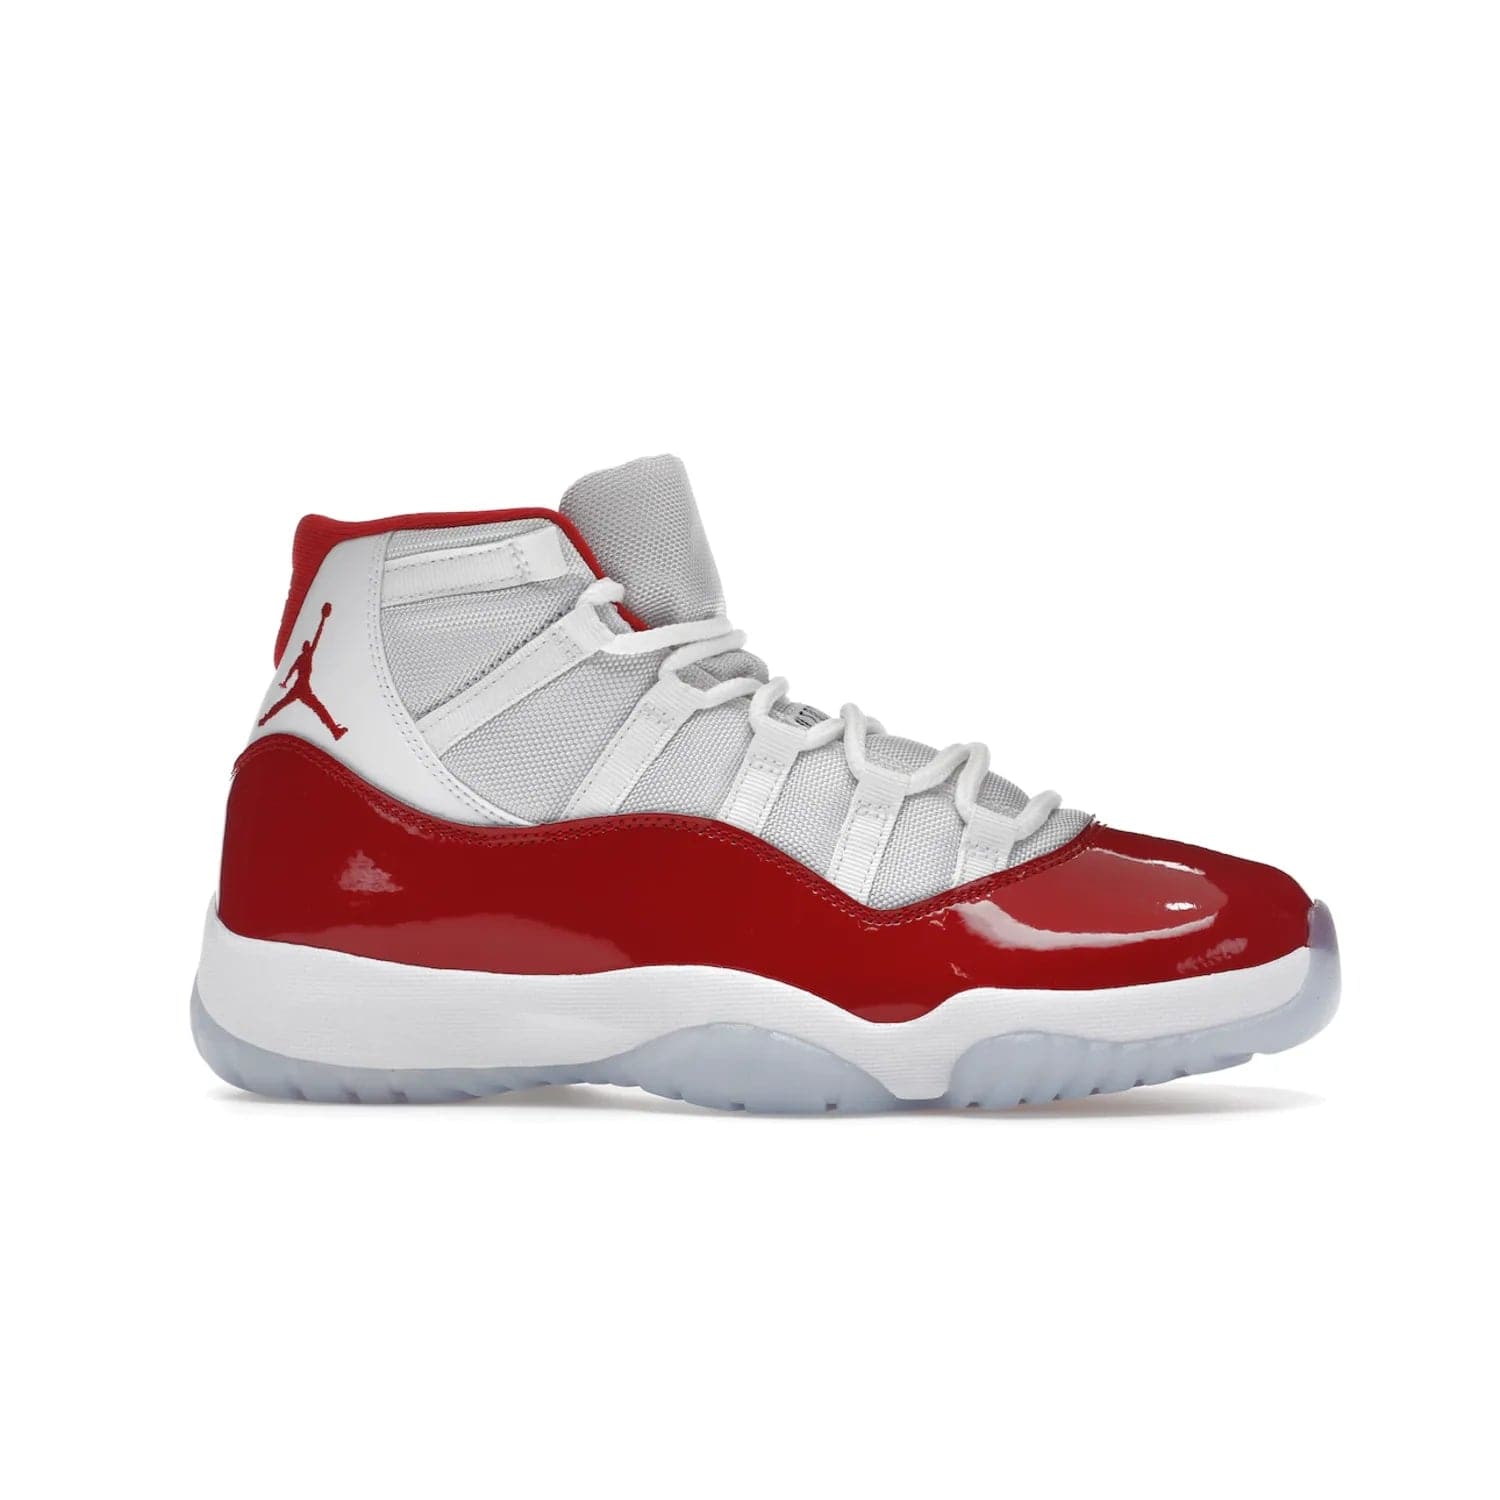 Jordan 11 Retro Cherry (2022) - Image 2 - Only at www.BallersClubKickz.com - The Air Jordan 11 Cherry features classic patent leather with Cherry red accents, icy blue outsole, and debossed 23 on the heel tab. Refresh your sneaker game with this iconic update, available December 10, 2022.